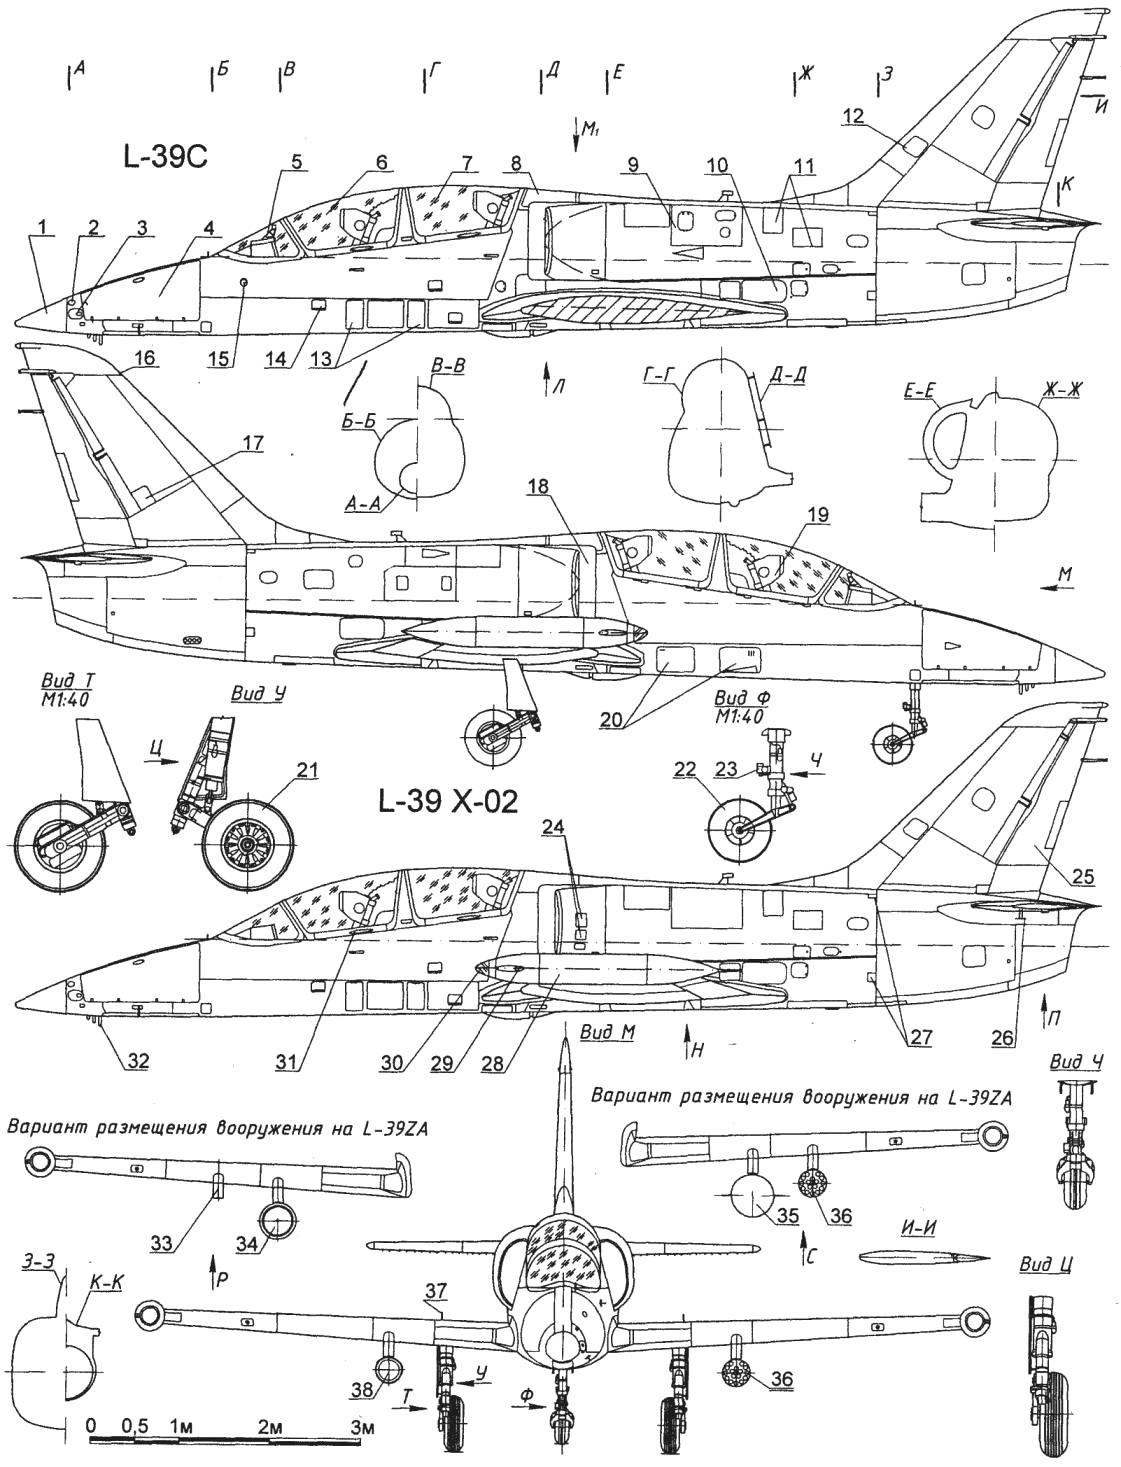 Training and combat aircraft L-39